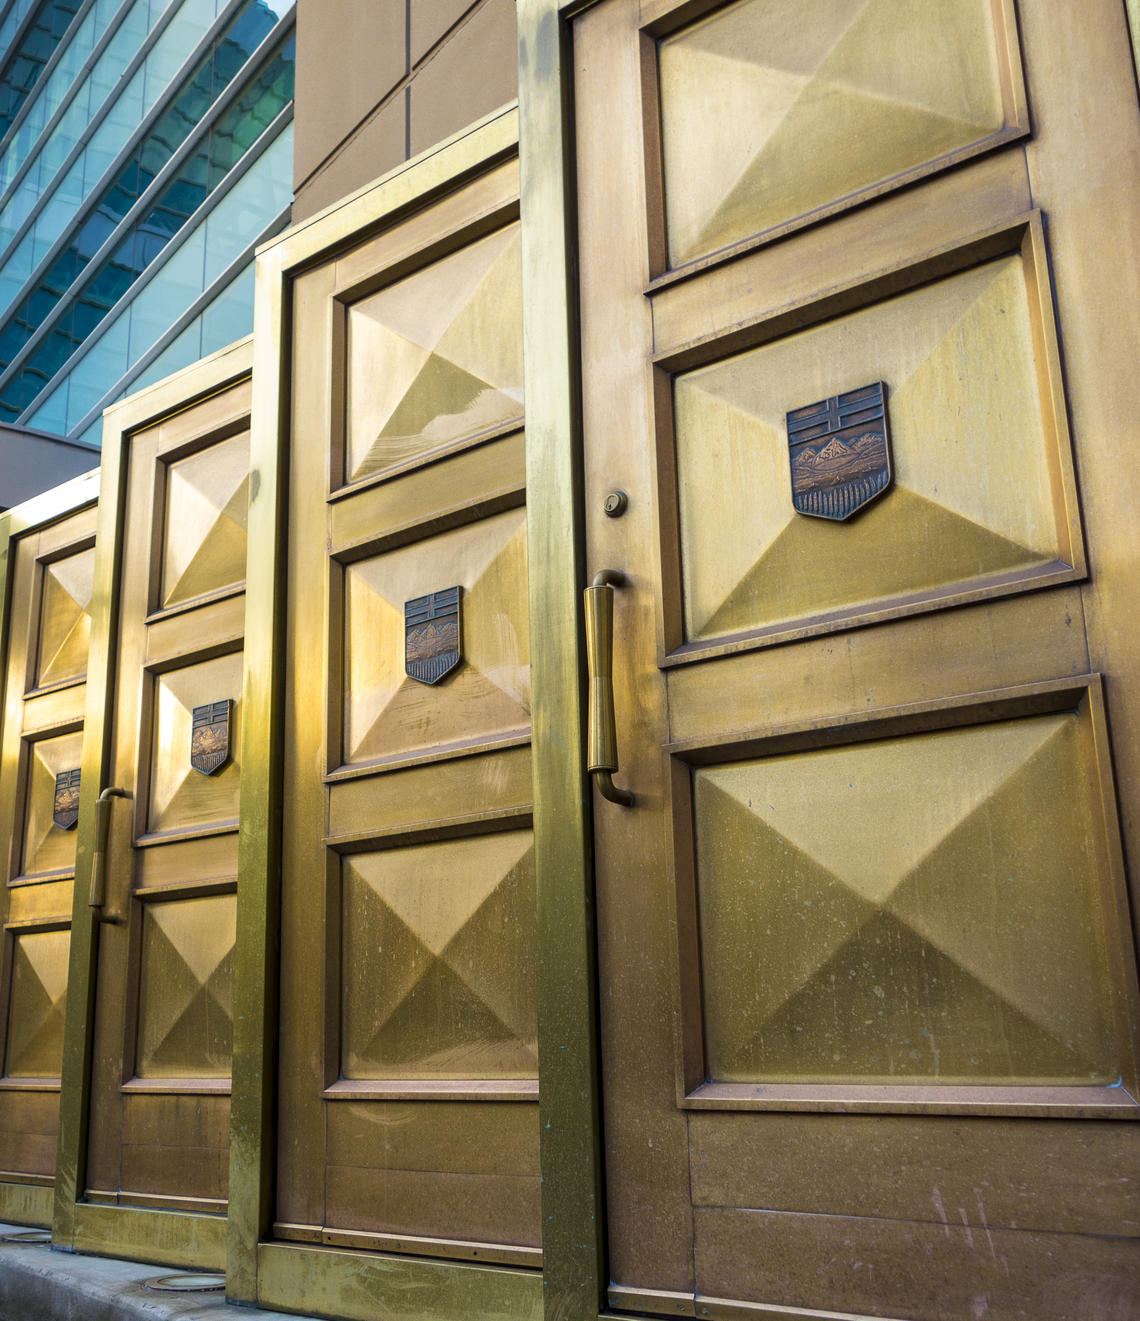 The golden doors of the old Calgary Courthouse now stand outside the Calgary Courts Centre, the largest court facility in Canada and the second largest in North America.